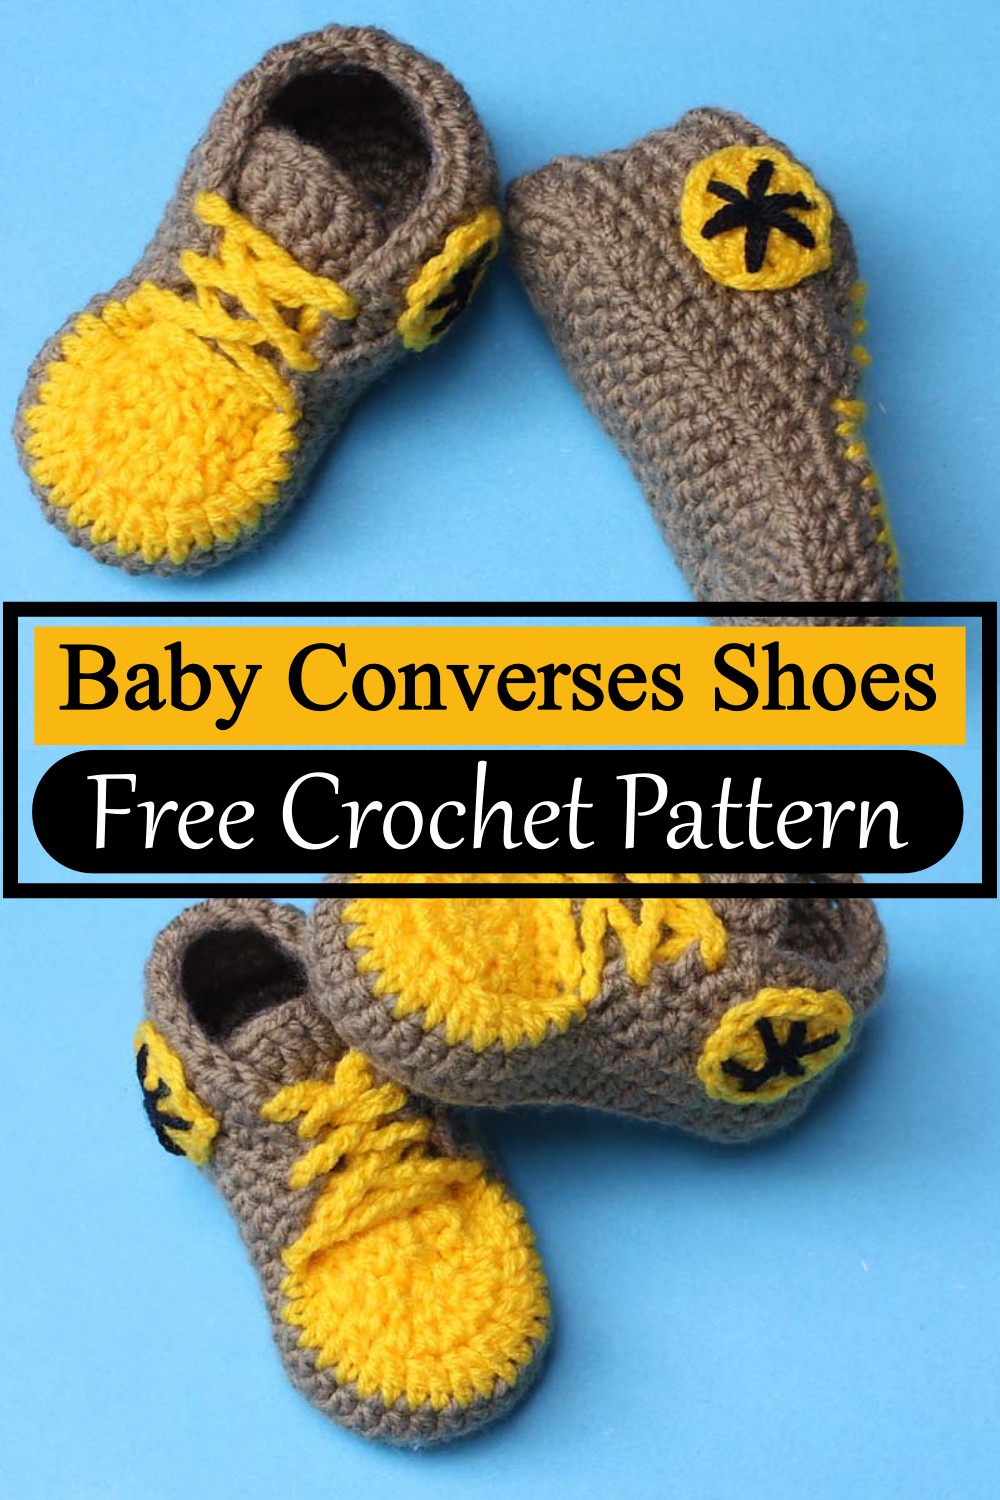 Baby Converses Shoes